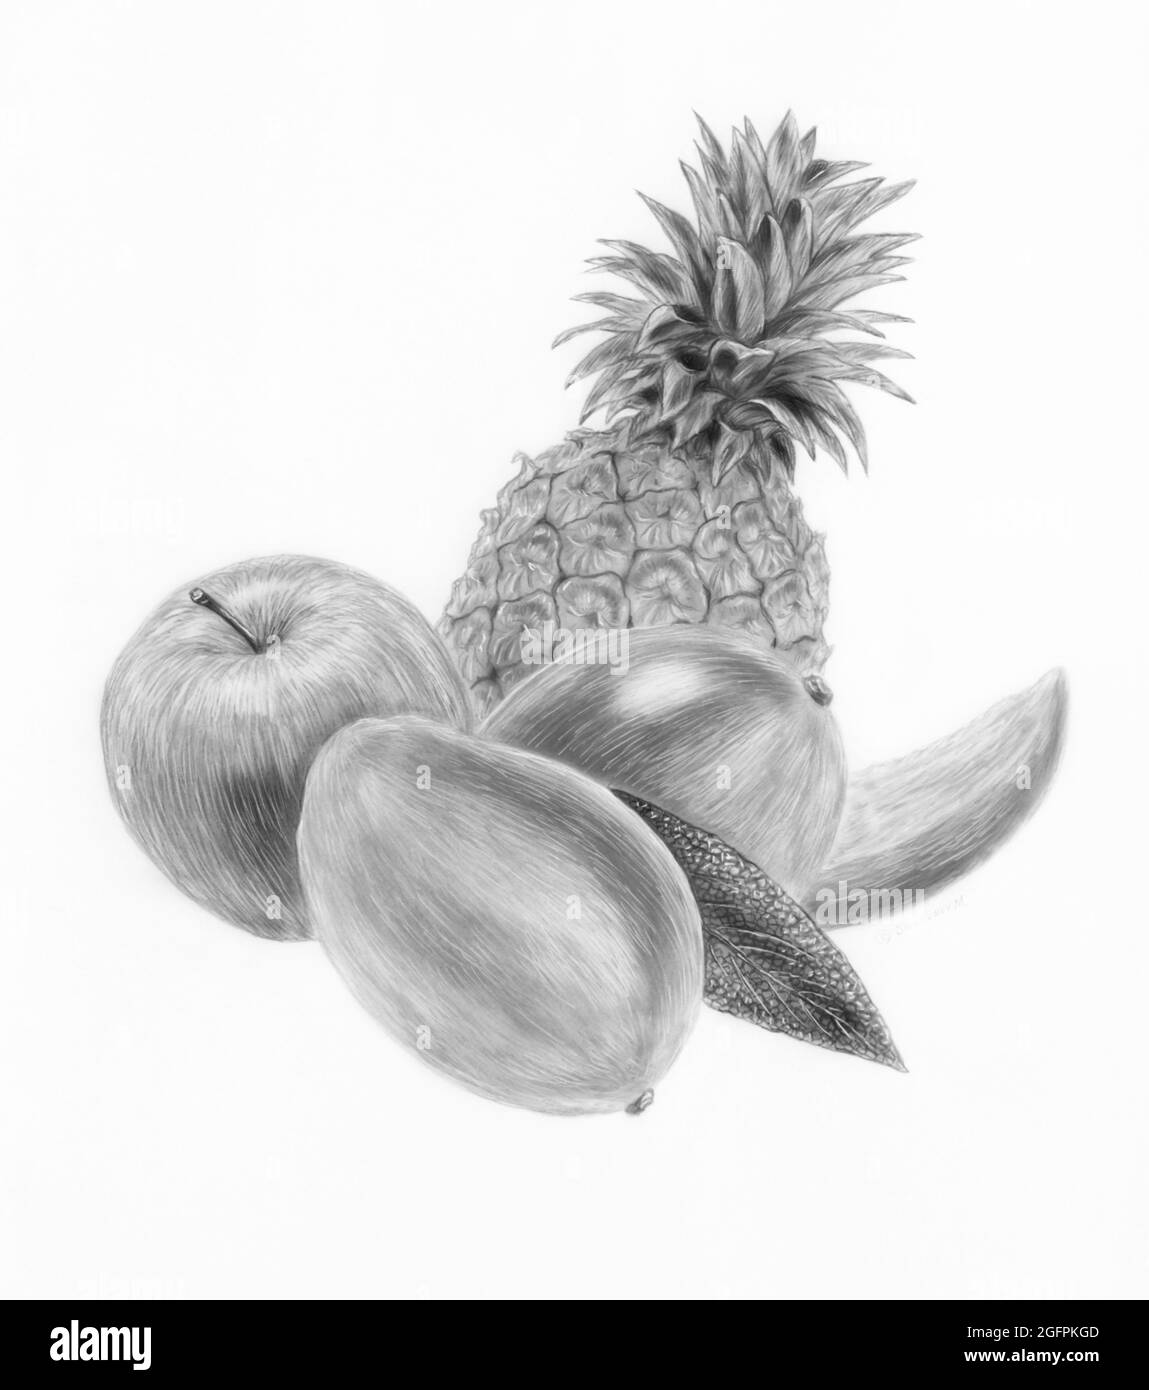 100,000 Pineapple drawing Vector Images | Depositphotos